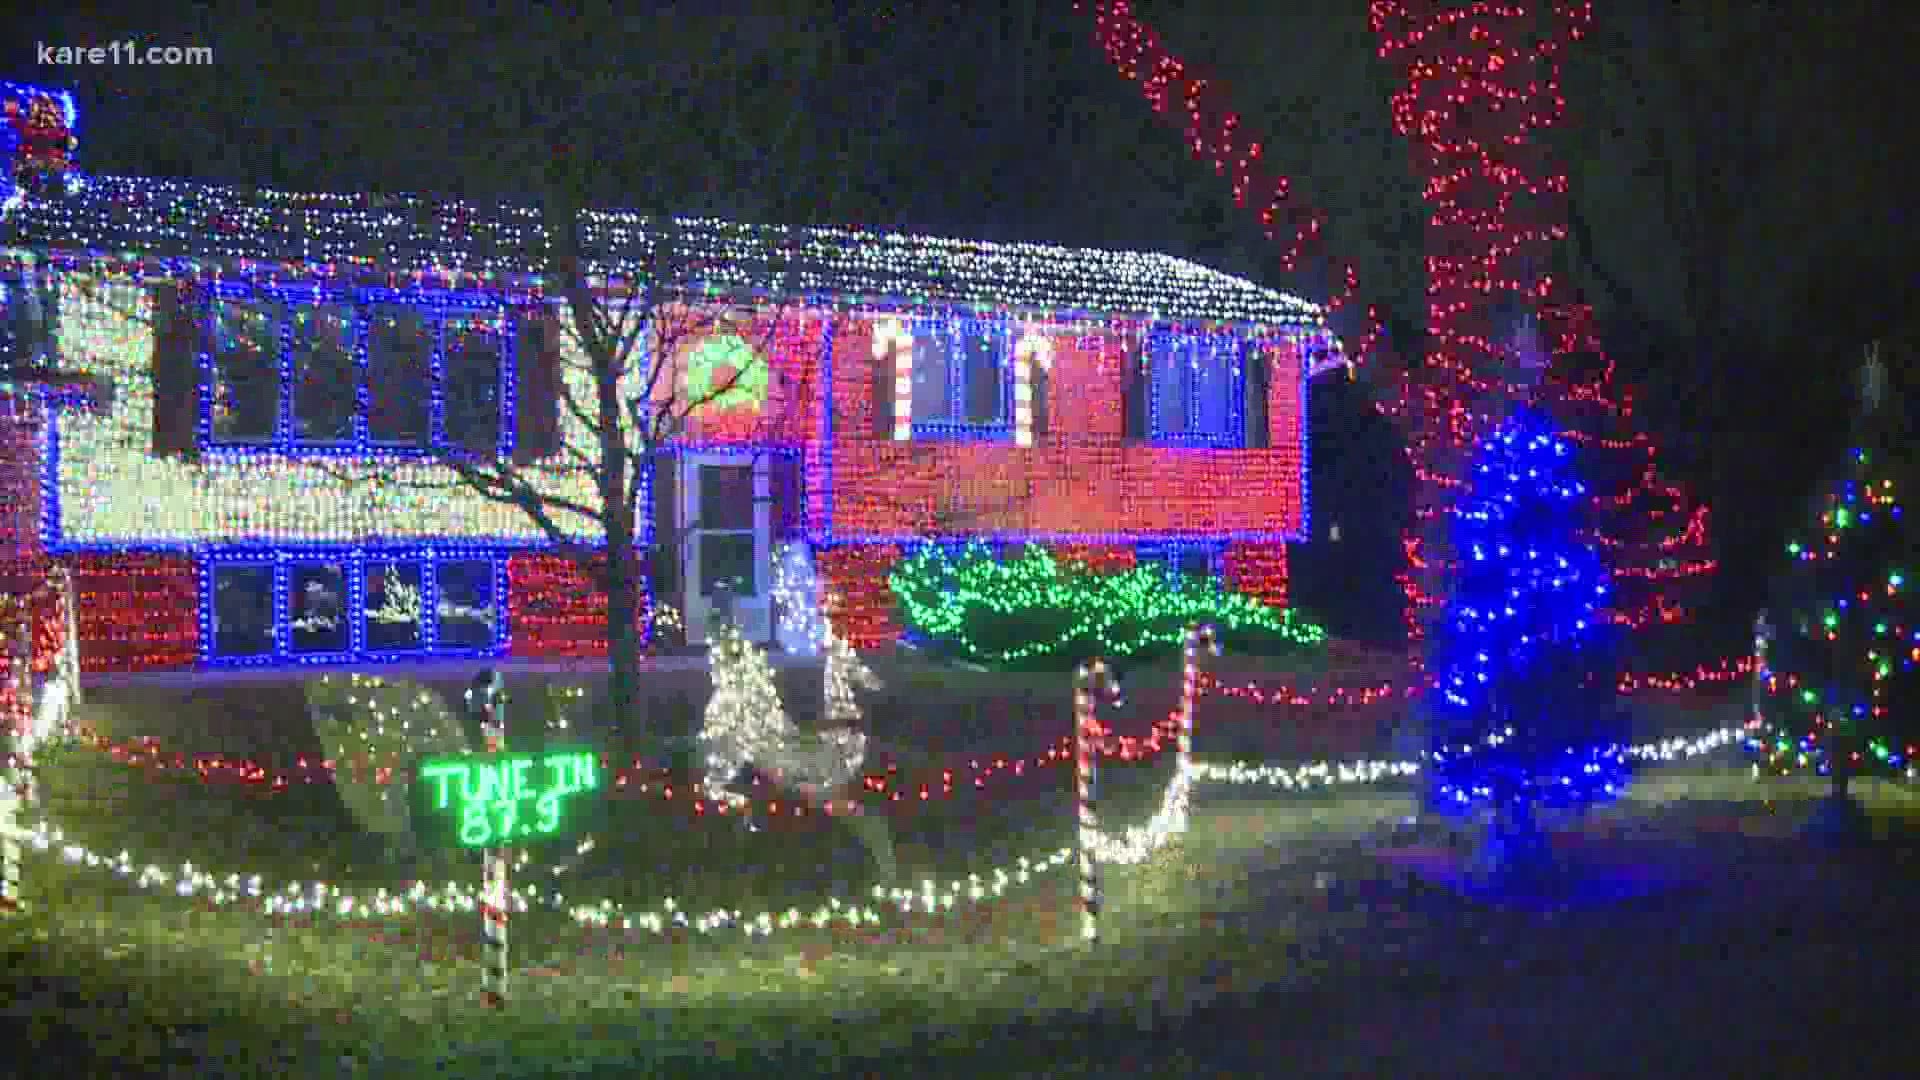 Love looking at holiday lights? Head over to Burnsville, where neighbors are engaged in some friendly competition to create the most dazzling display.